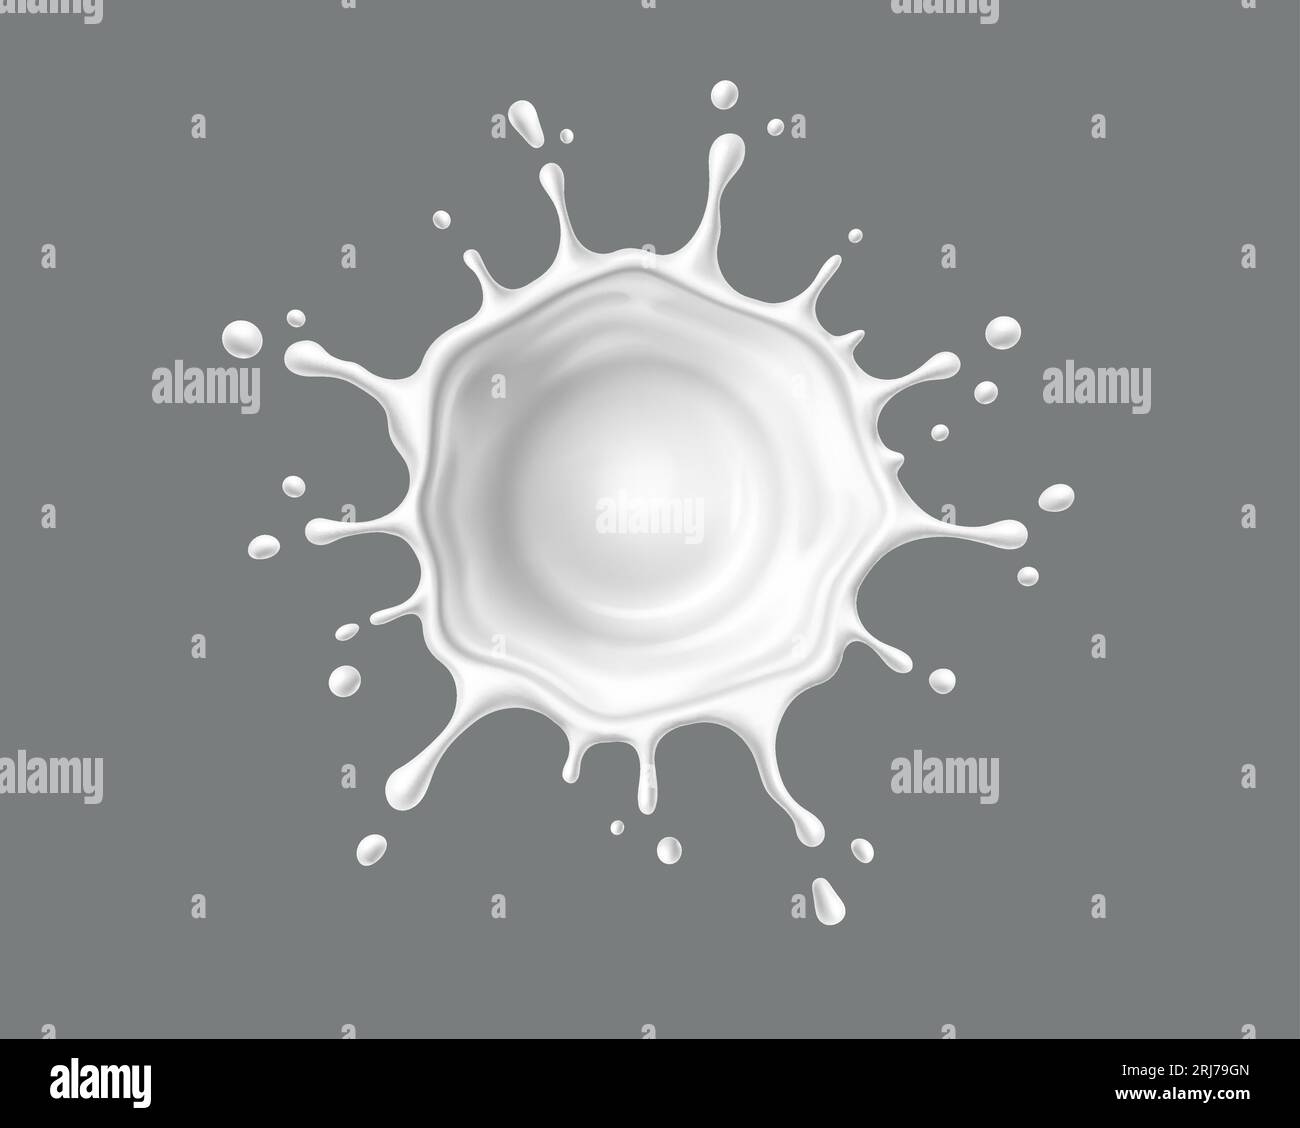 Liquid white yogurt or milk cream flow round splash top view. Isolated 3d vector glistening creamy cascade in a smooth, circular flow, creating a mesmerizing high angle view with elegant droplets Stock Vector